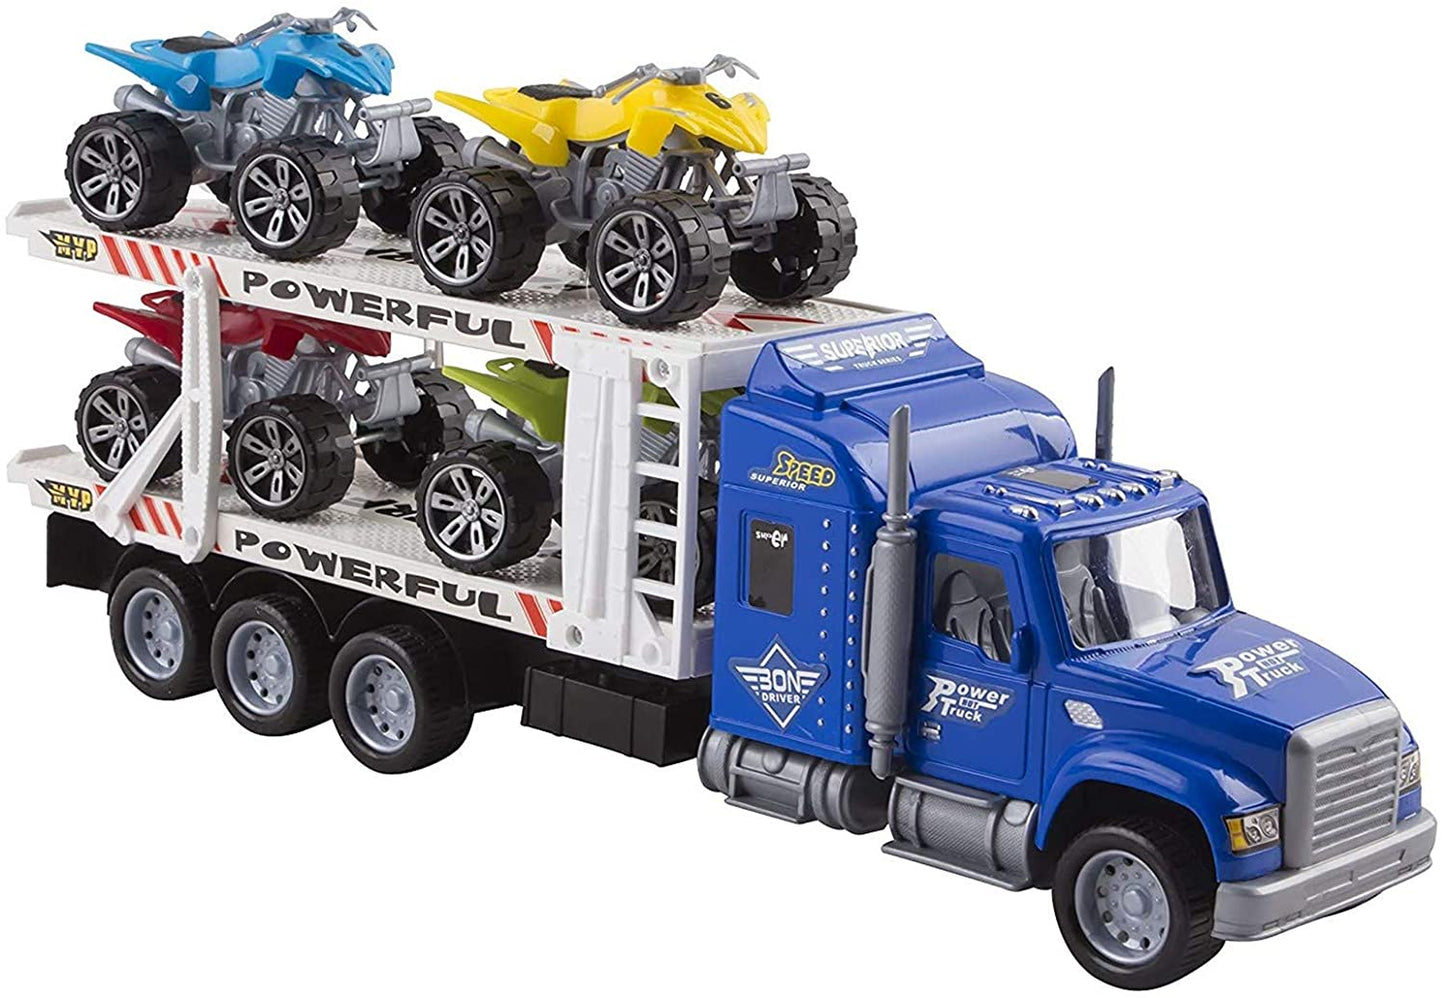 Semi Truck Trailer 15" Includes 4 Atvs Friction Carrier Hauler Kids Push and Go Big Rig Auto Transporter Vehicle Semi-Truck Car Pretend Play for Children Boys Girls Toddlers